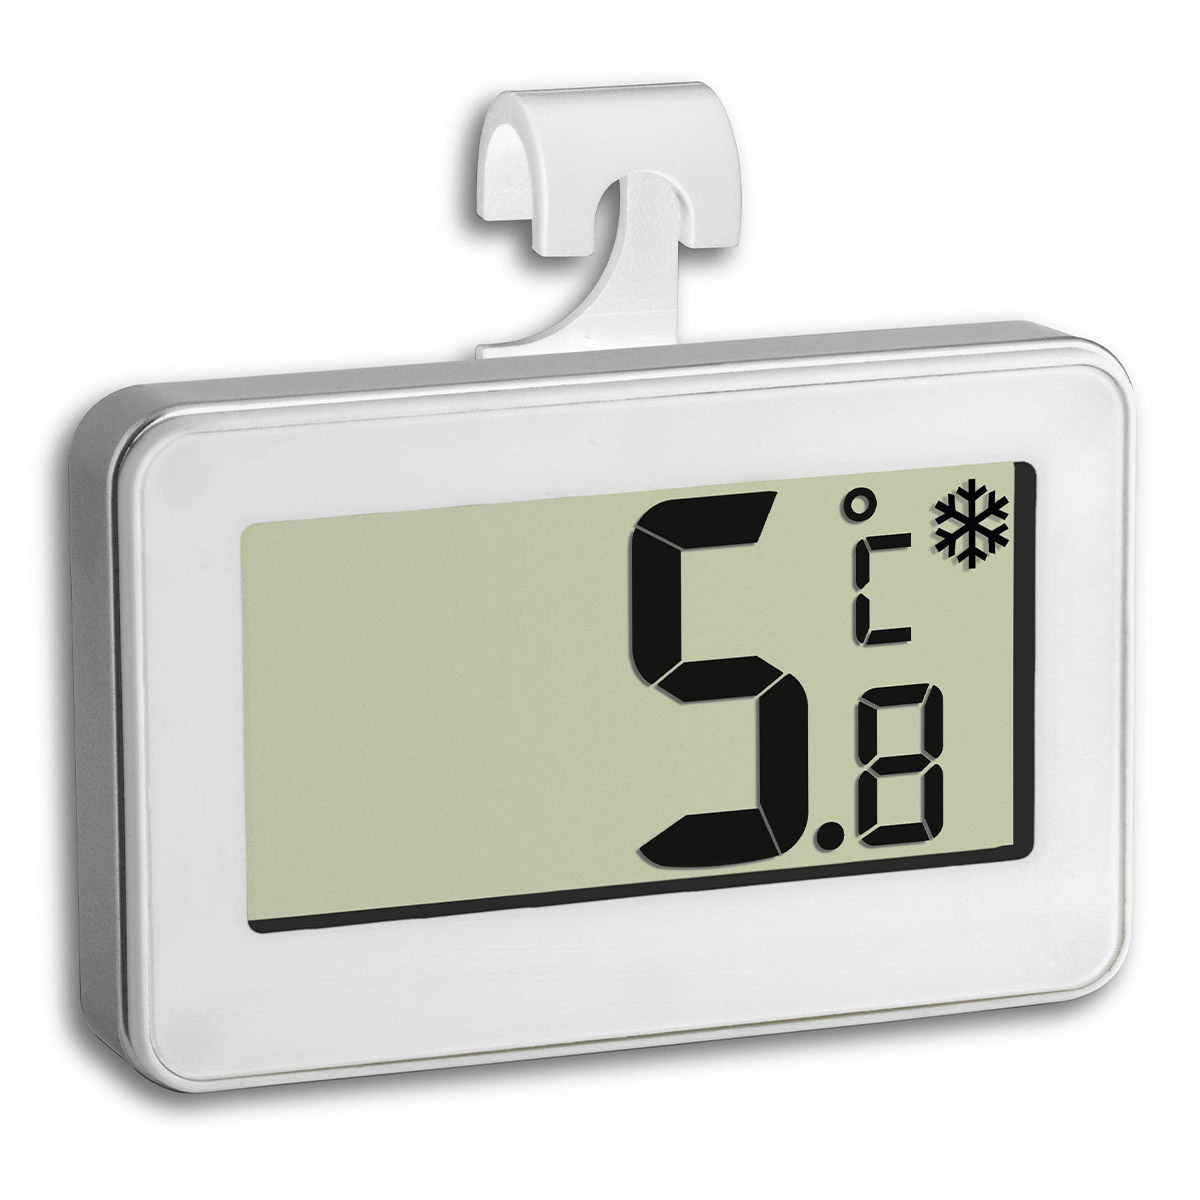 30-2028-02-digitales-thermometer-1200x1200px.jpg